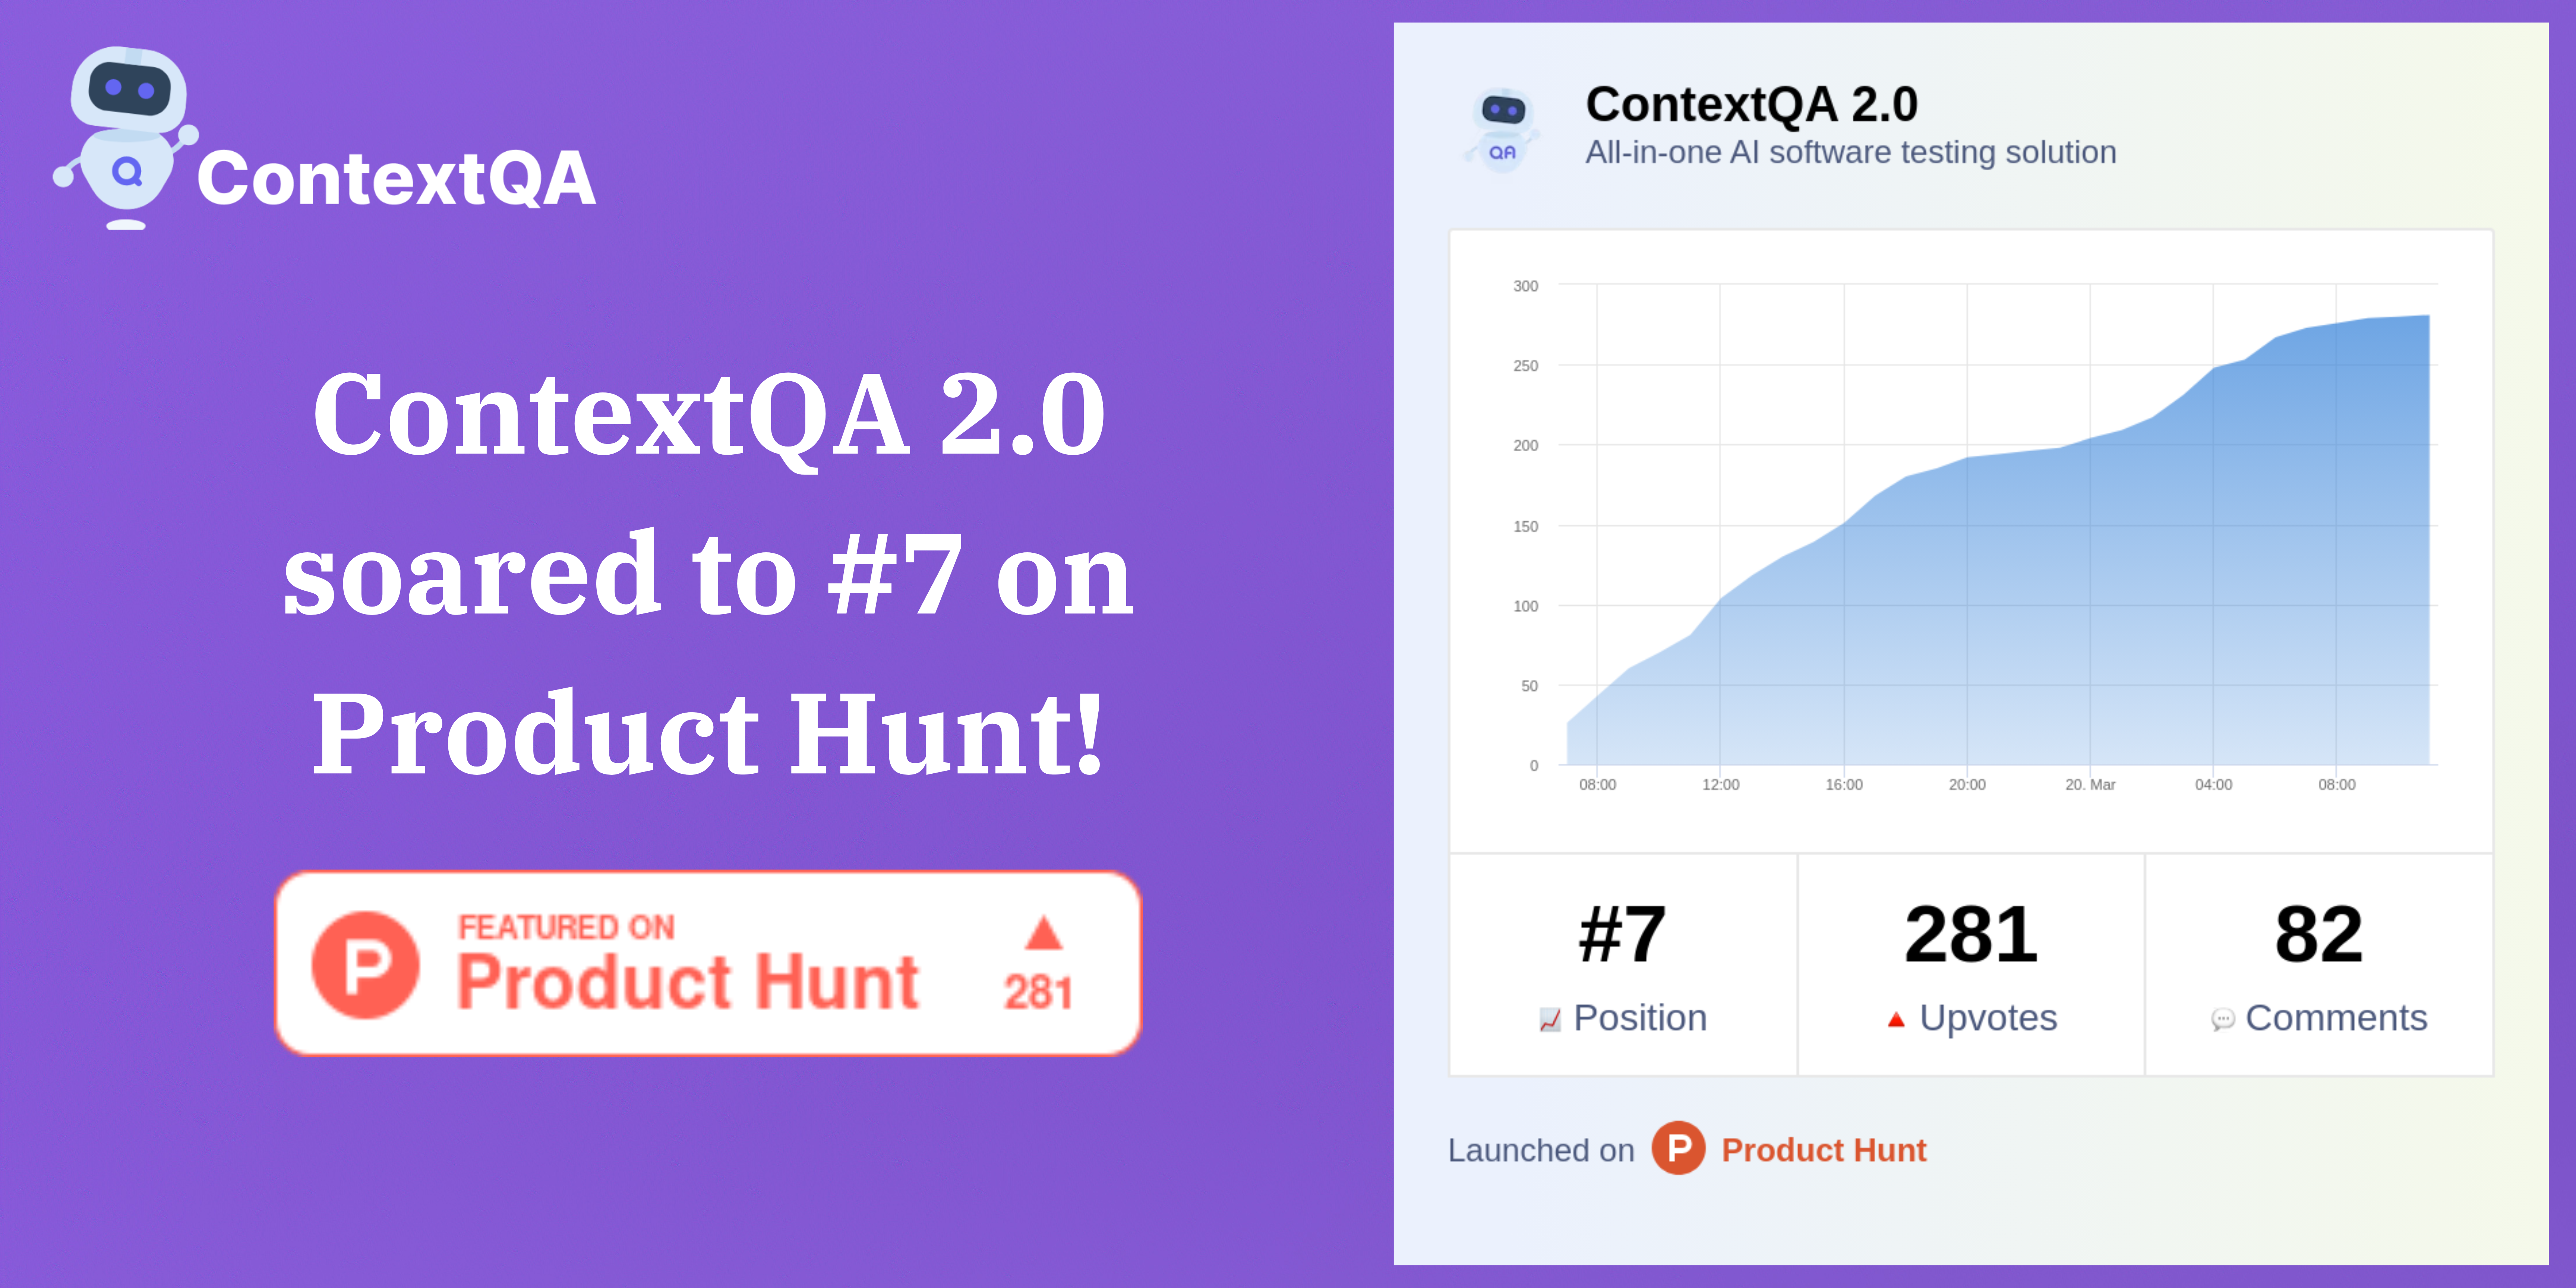 ContextQA 2.0 has made its grand appearance on Product Hunt!